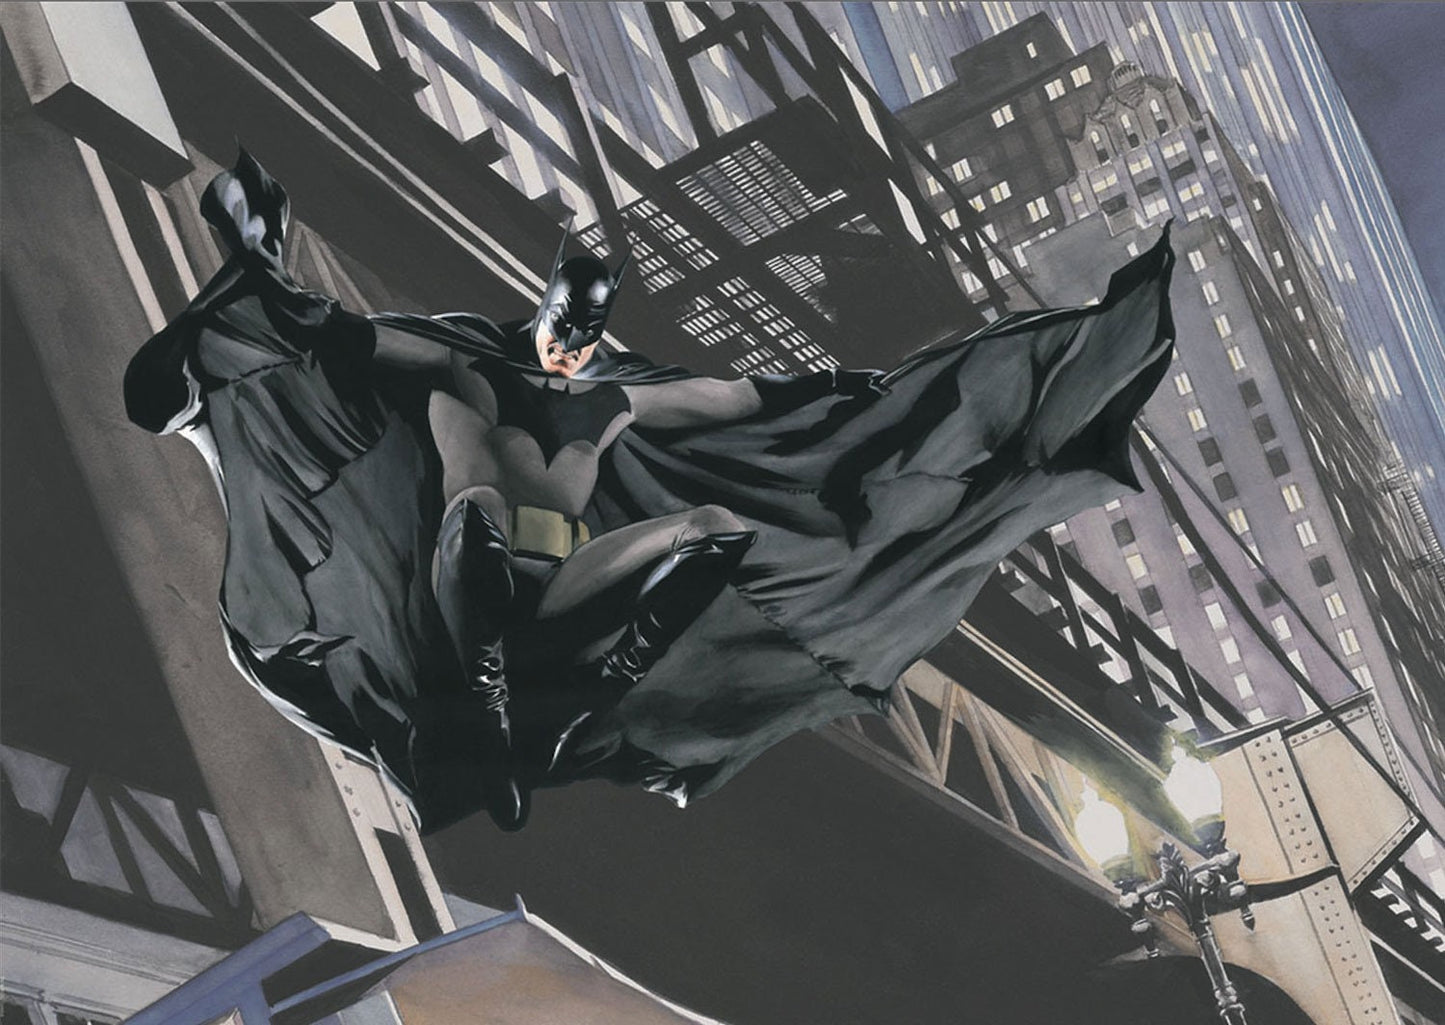 Alex Ross SIGNED Descent on Gotham Batman NYCC 2021 Exclusive Fine Art Print on Paper Artist Proof Version Limited Edition of 50